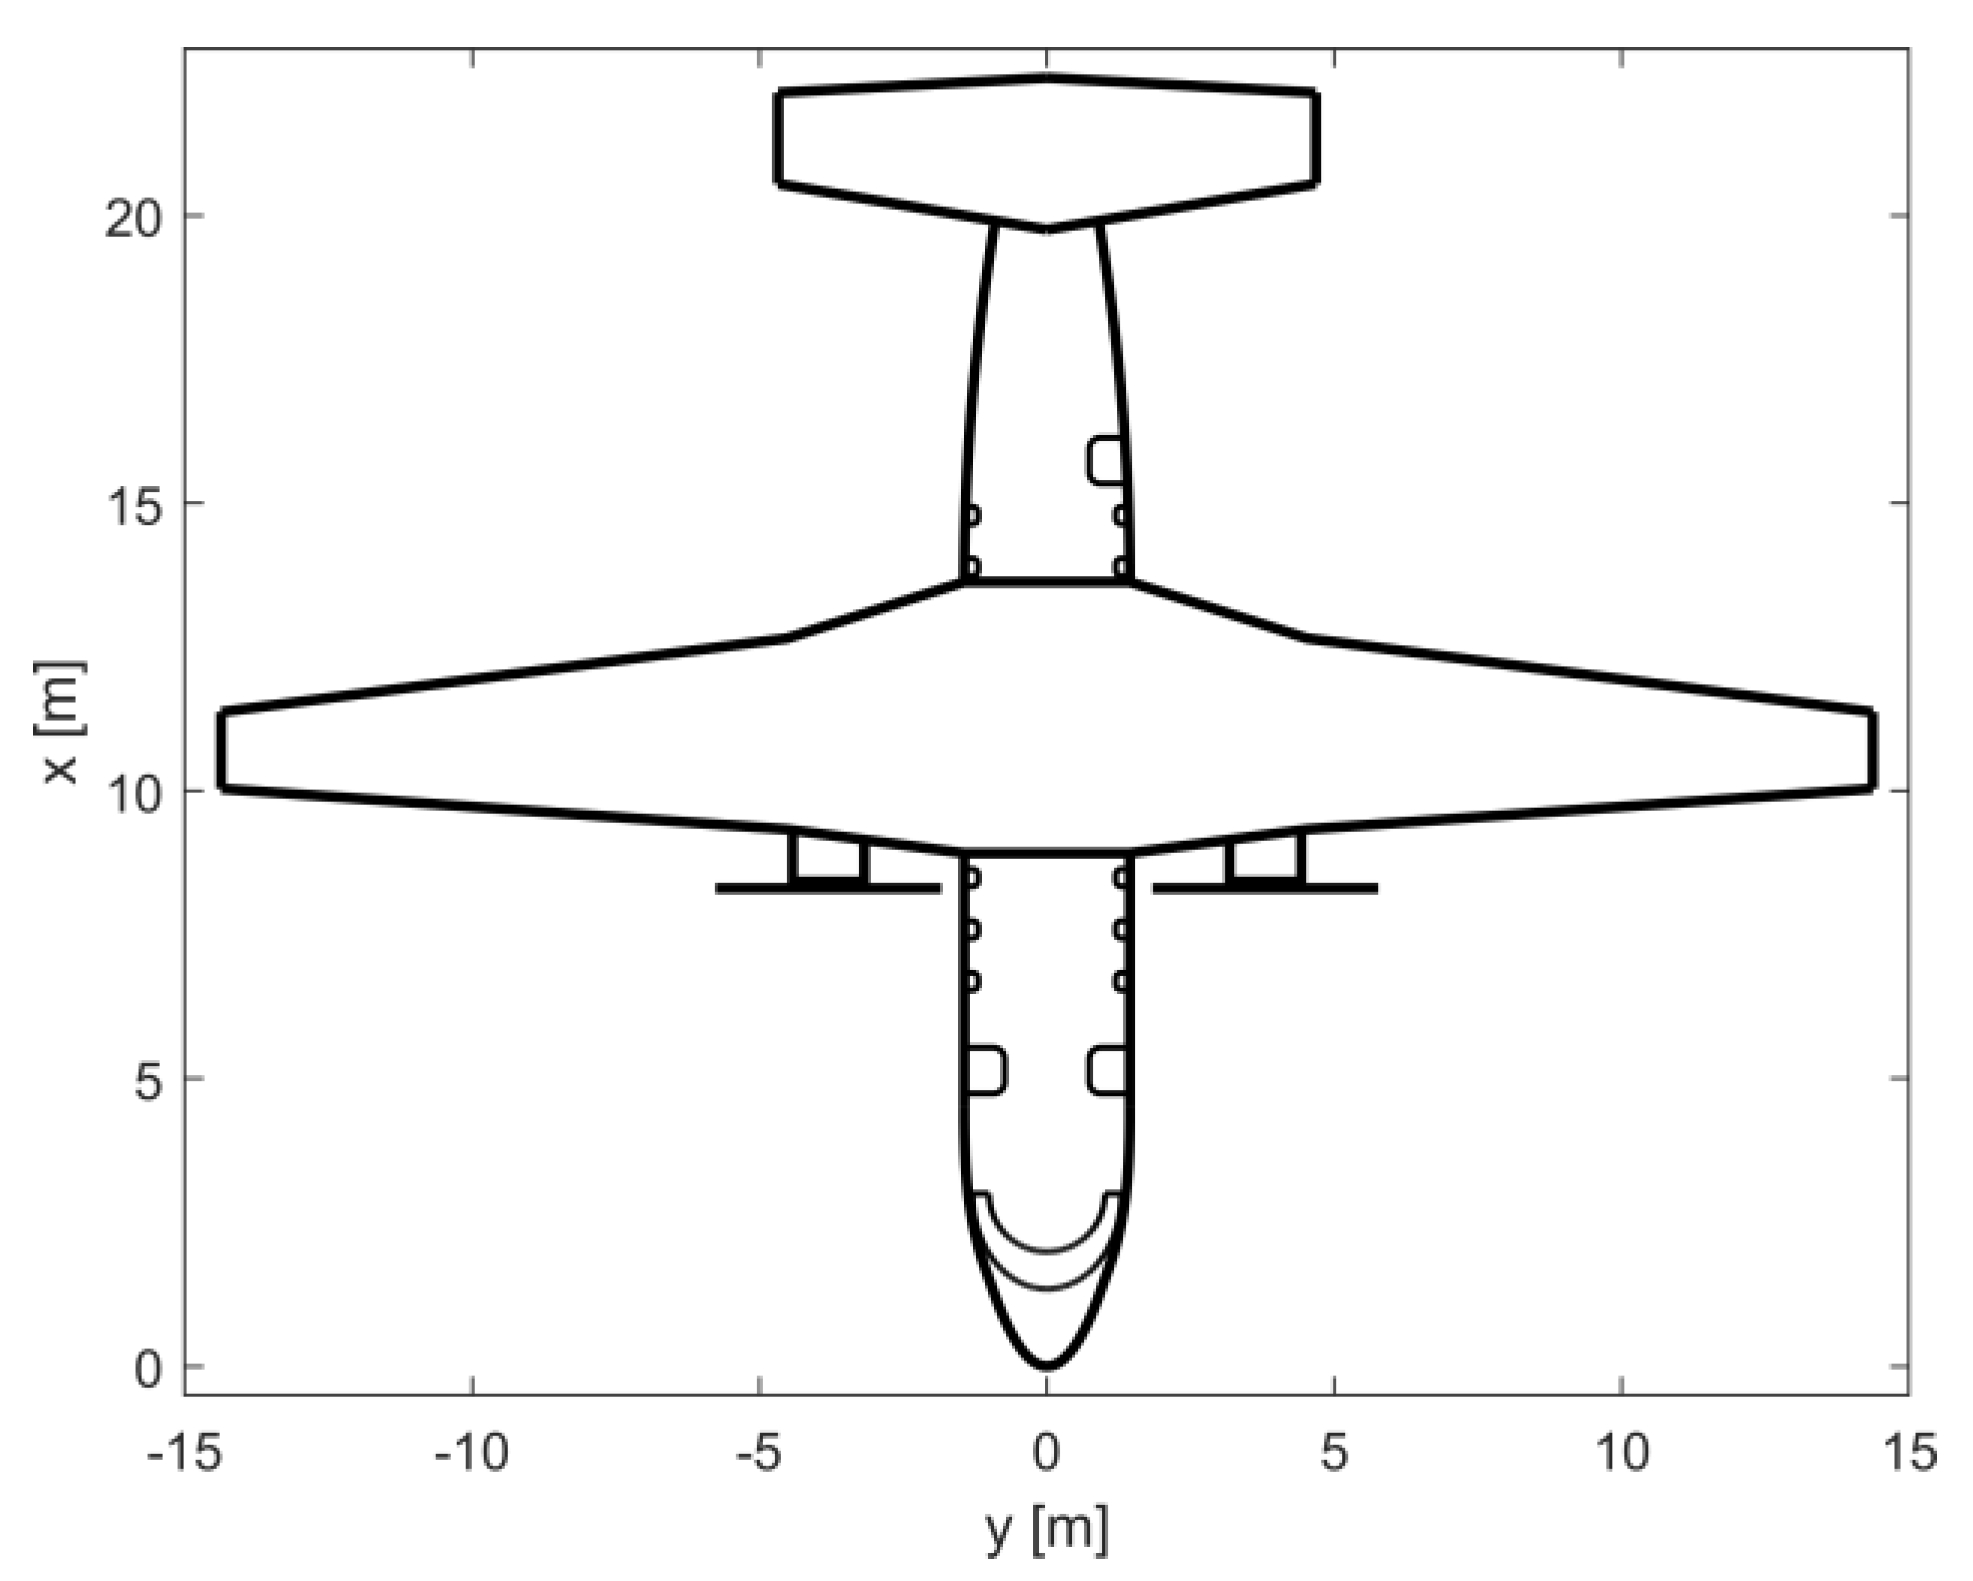 Review of evolving trends in blended wing body aircraft design -  ScienceDirect